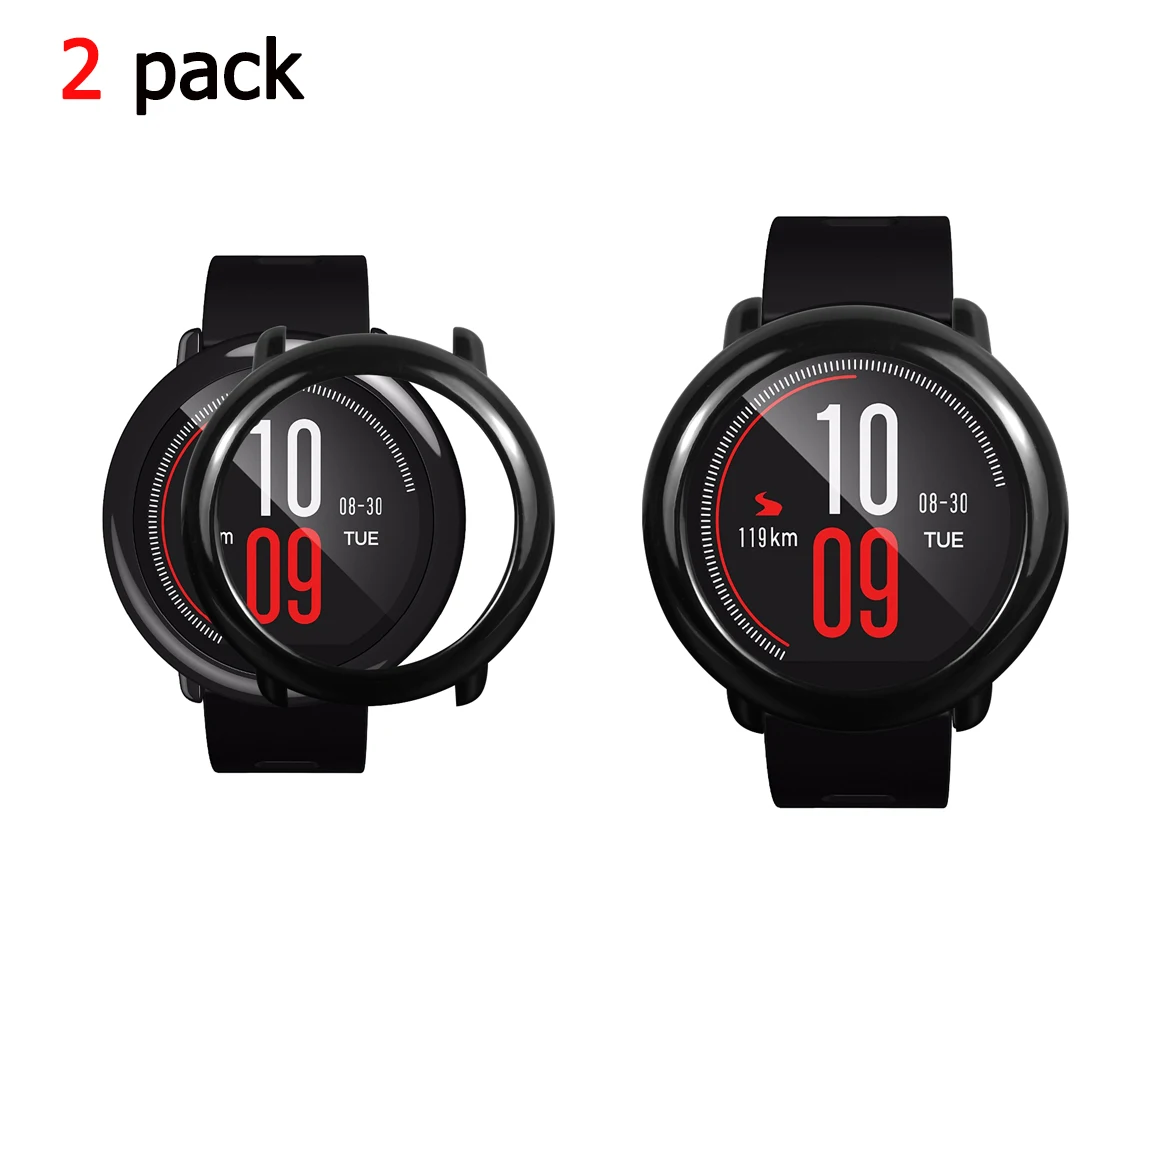 

Slim Watch Protective Case Cover Frame Shell for Xiaomi Huami Amazfit Pace Watch Replacement watch protector cases cover 2 pack